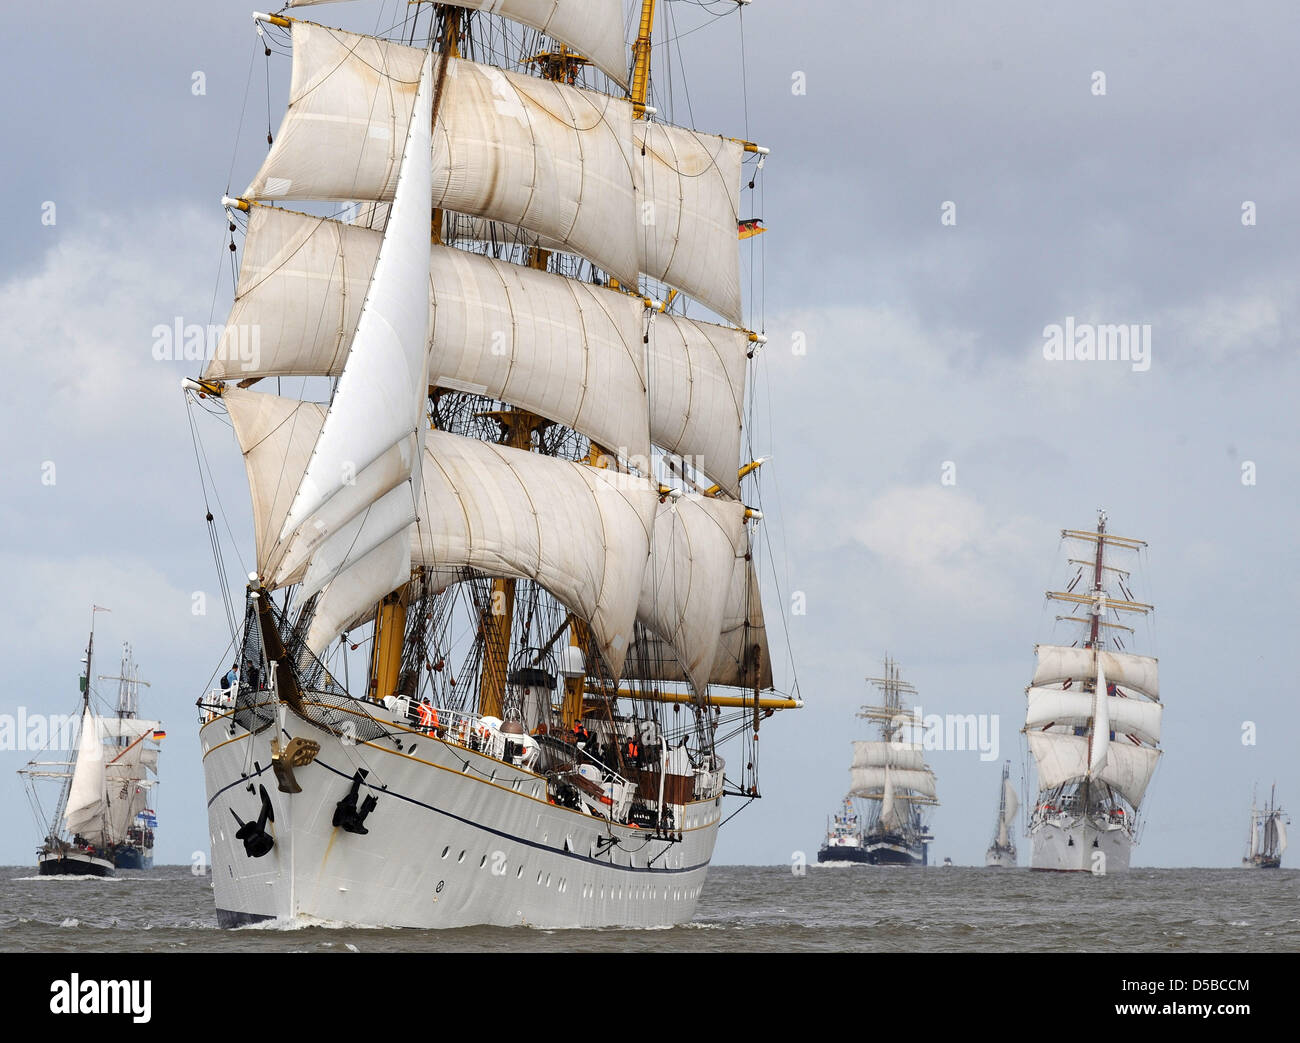 The tall ship 'Gorch Fock' (2-L) of the German Navy, the Russian 'Kruzenstern' (3-L, black hulk), the Russian 'Mir' (4-L) and the Polish 'Dar Mlodzezy' (5-L)of the maritime University in Gdynia meet during the Windjammer festival 'Sail 2010' in Bremerhaven, Germany, 25 August 2010. More than 200 ships from 15 nations participate in the maritime festival (25-29 August 2010). Around  Stock Photo